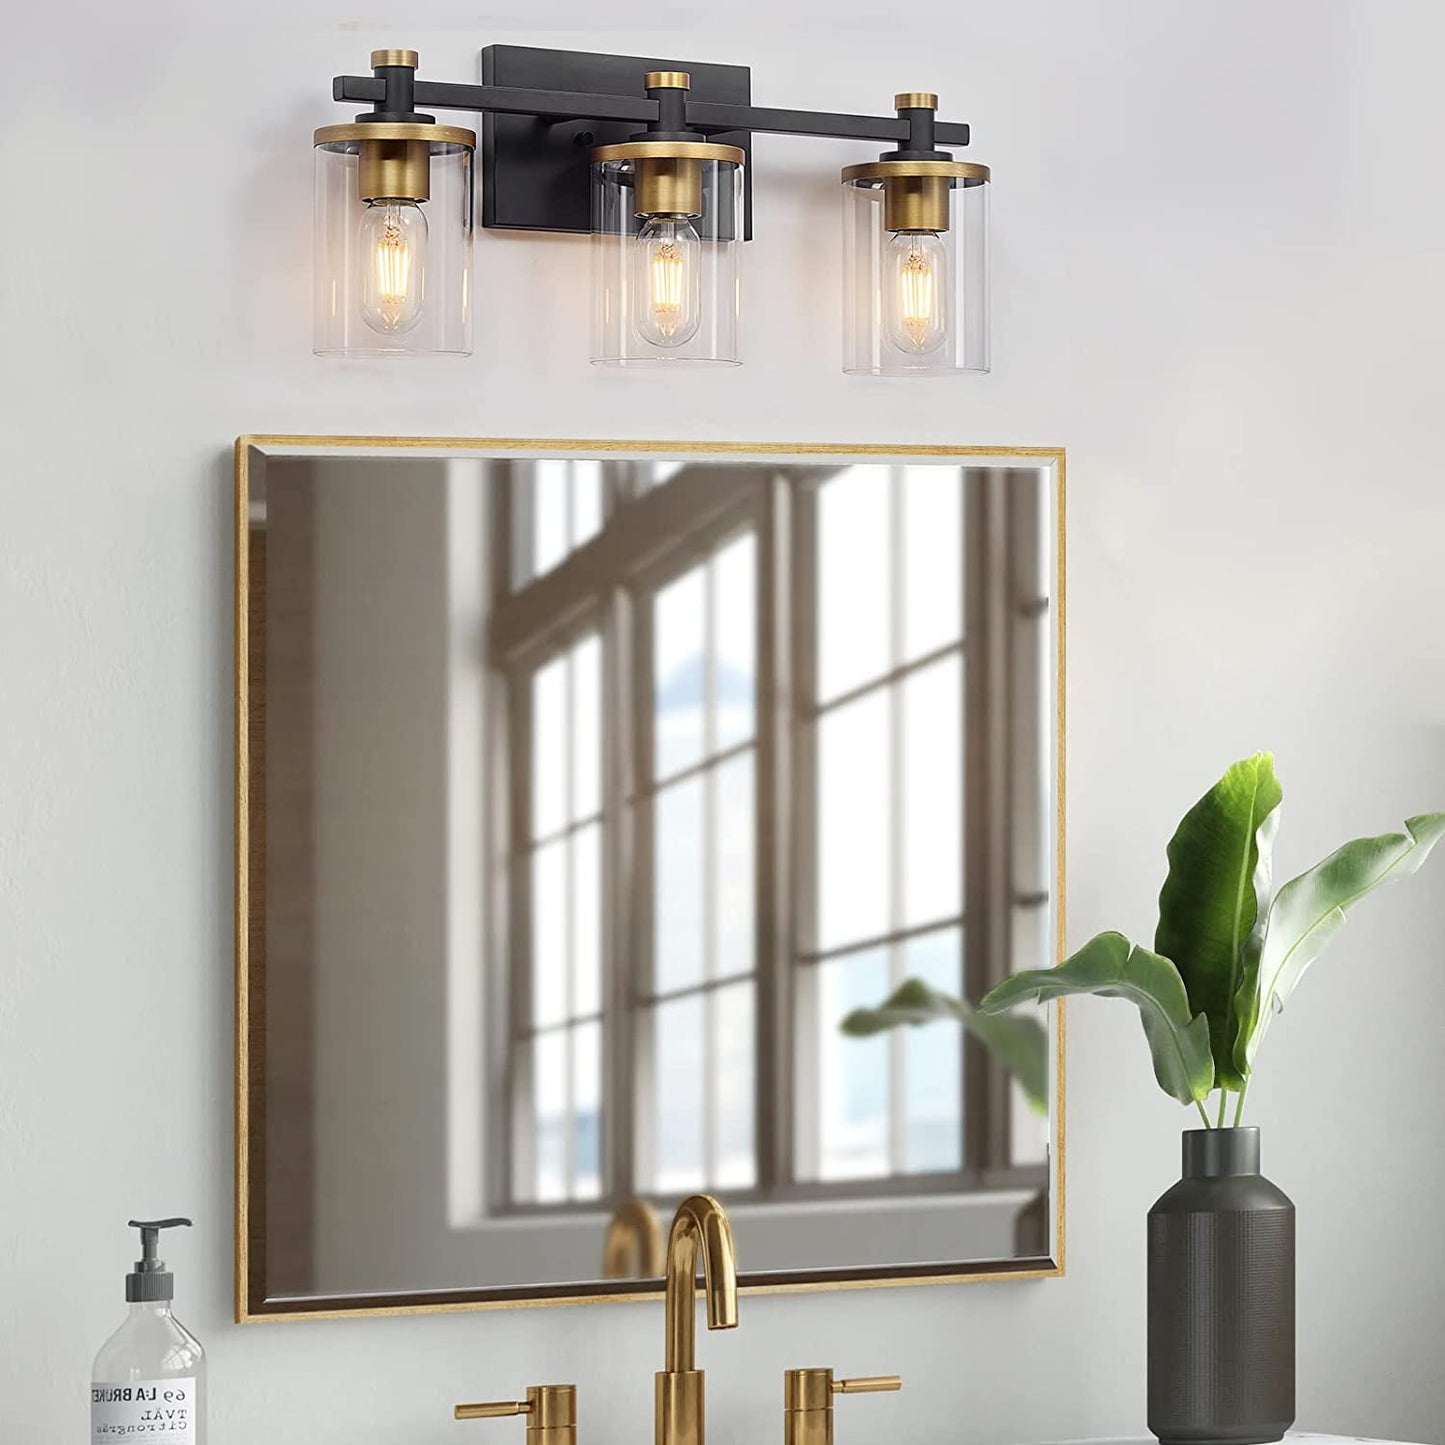 3 Light Bathroom Vanity Light Fixtures, Modern Black and Gold Vanity Lights Over Mirror, Vintage Wall Sconce with Clear Glass Shade, Brushed Gold Vanity Lights for Bathroom